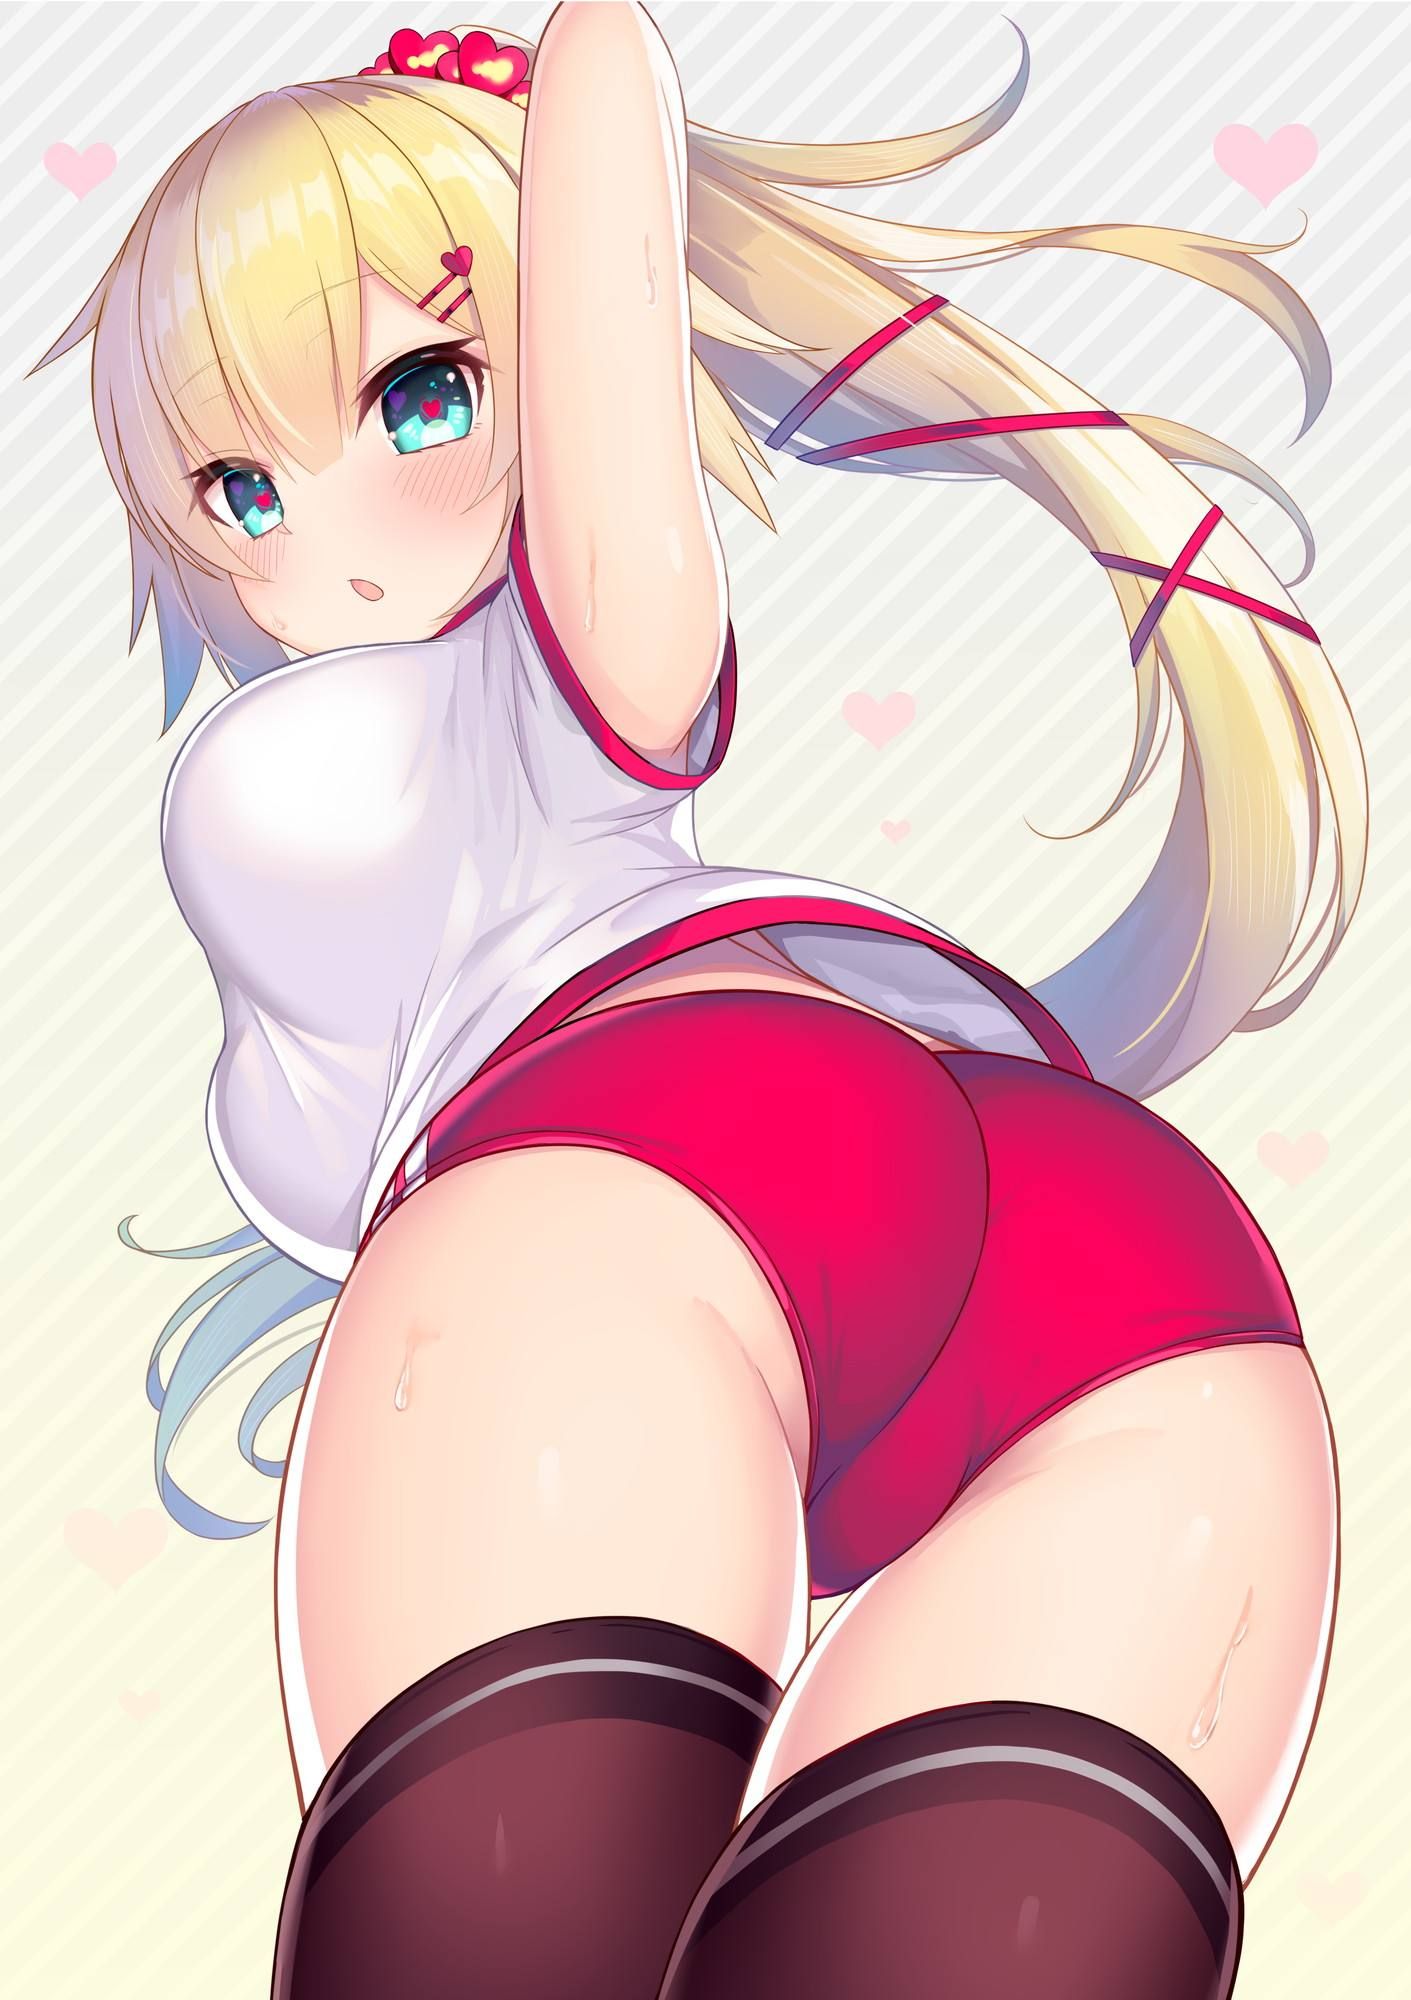 It's grown too much and doesn't fit the size?! Image of a girl ♪ in bloomers + gym clothes with snappy breasts and buttocks 37